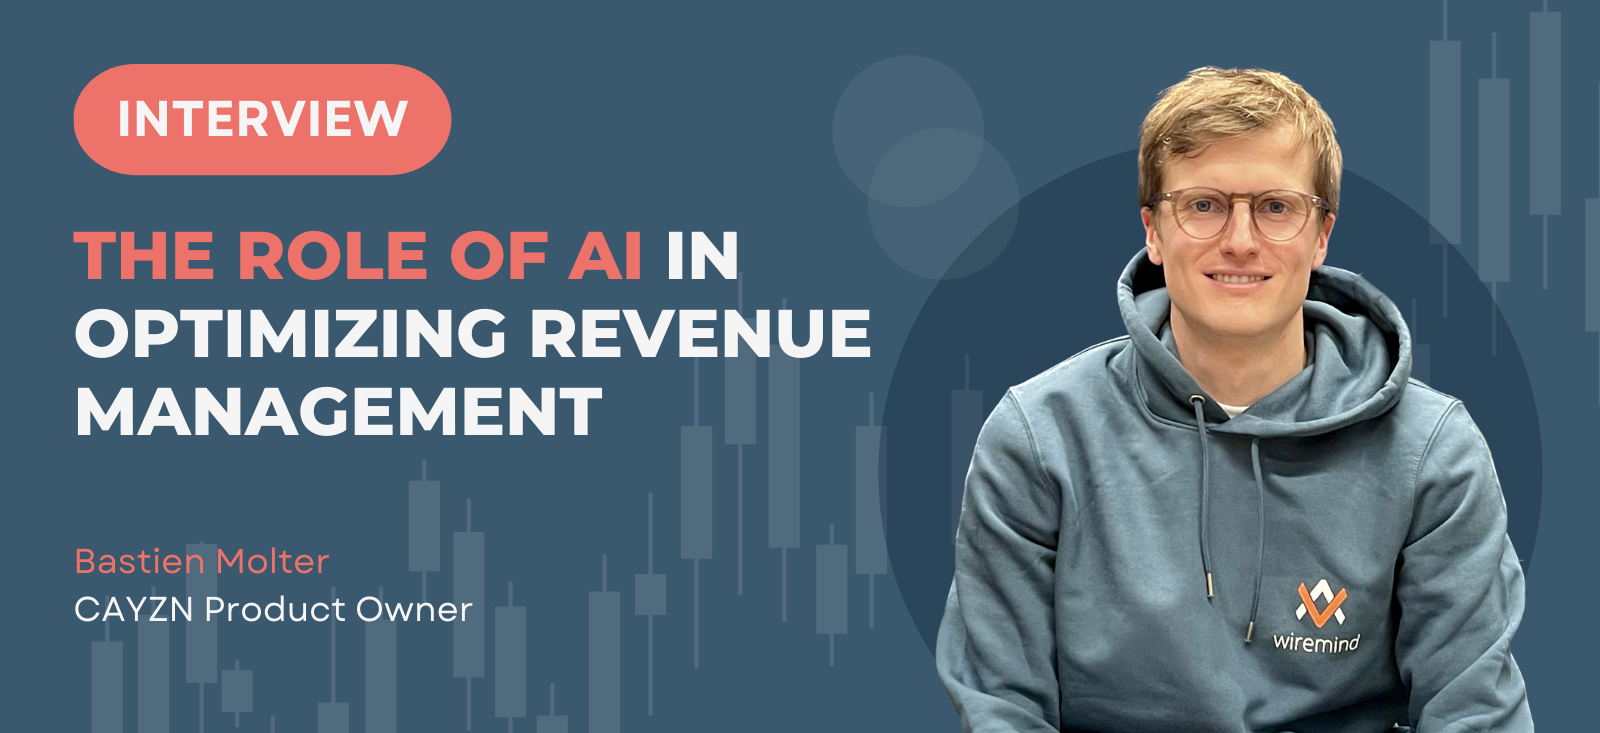 The role of AI in optimizing revenue management: An interview with Bastien Molter, CAYZN Product Owner